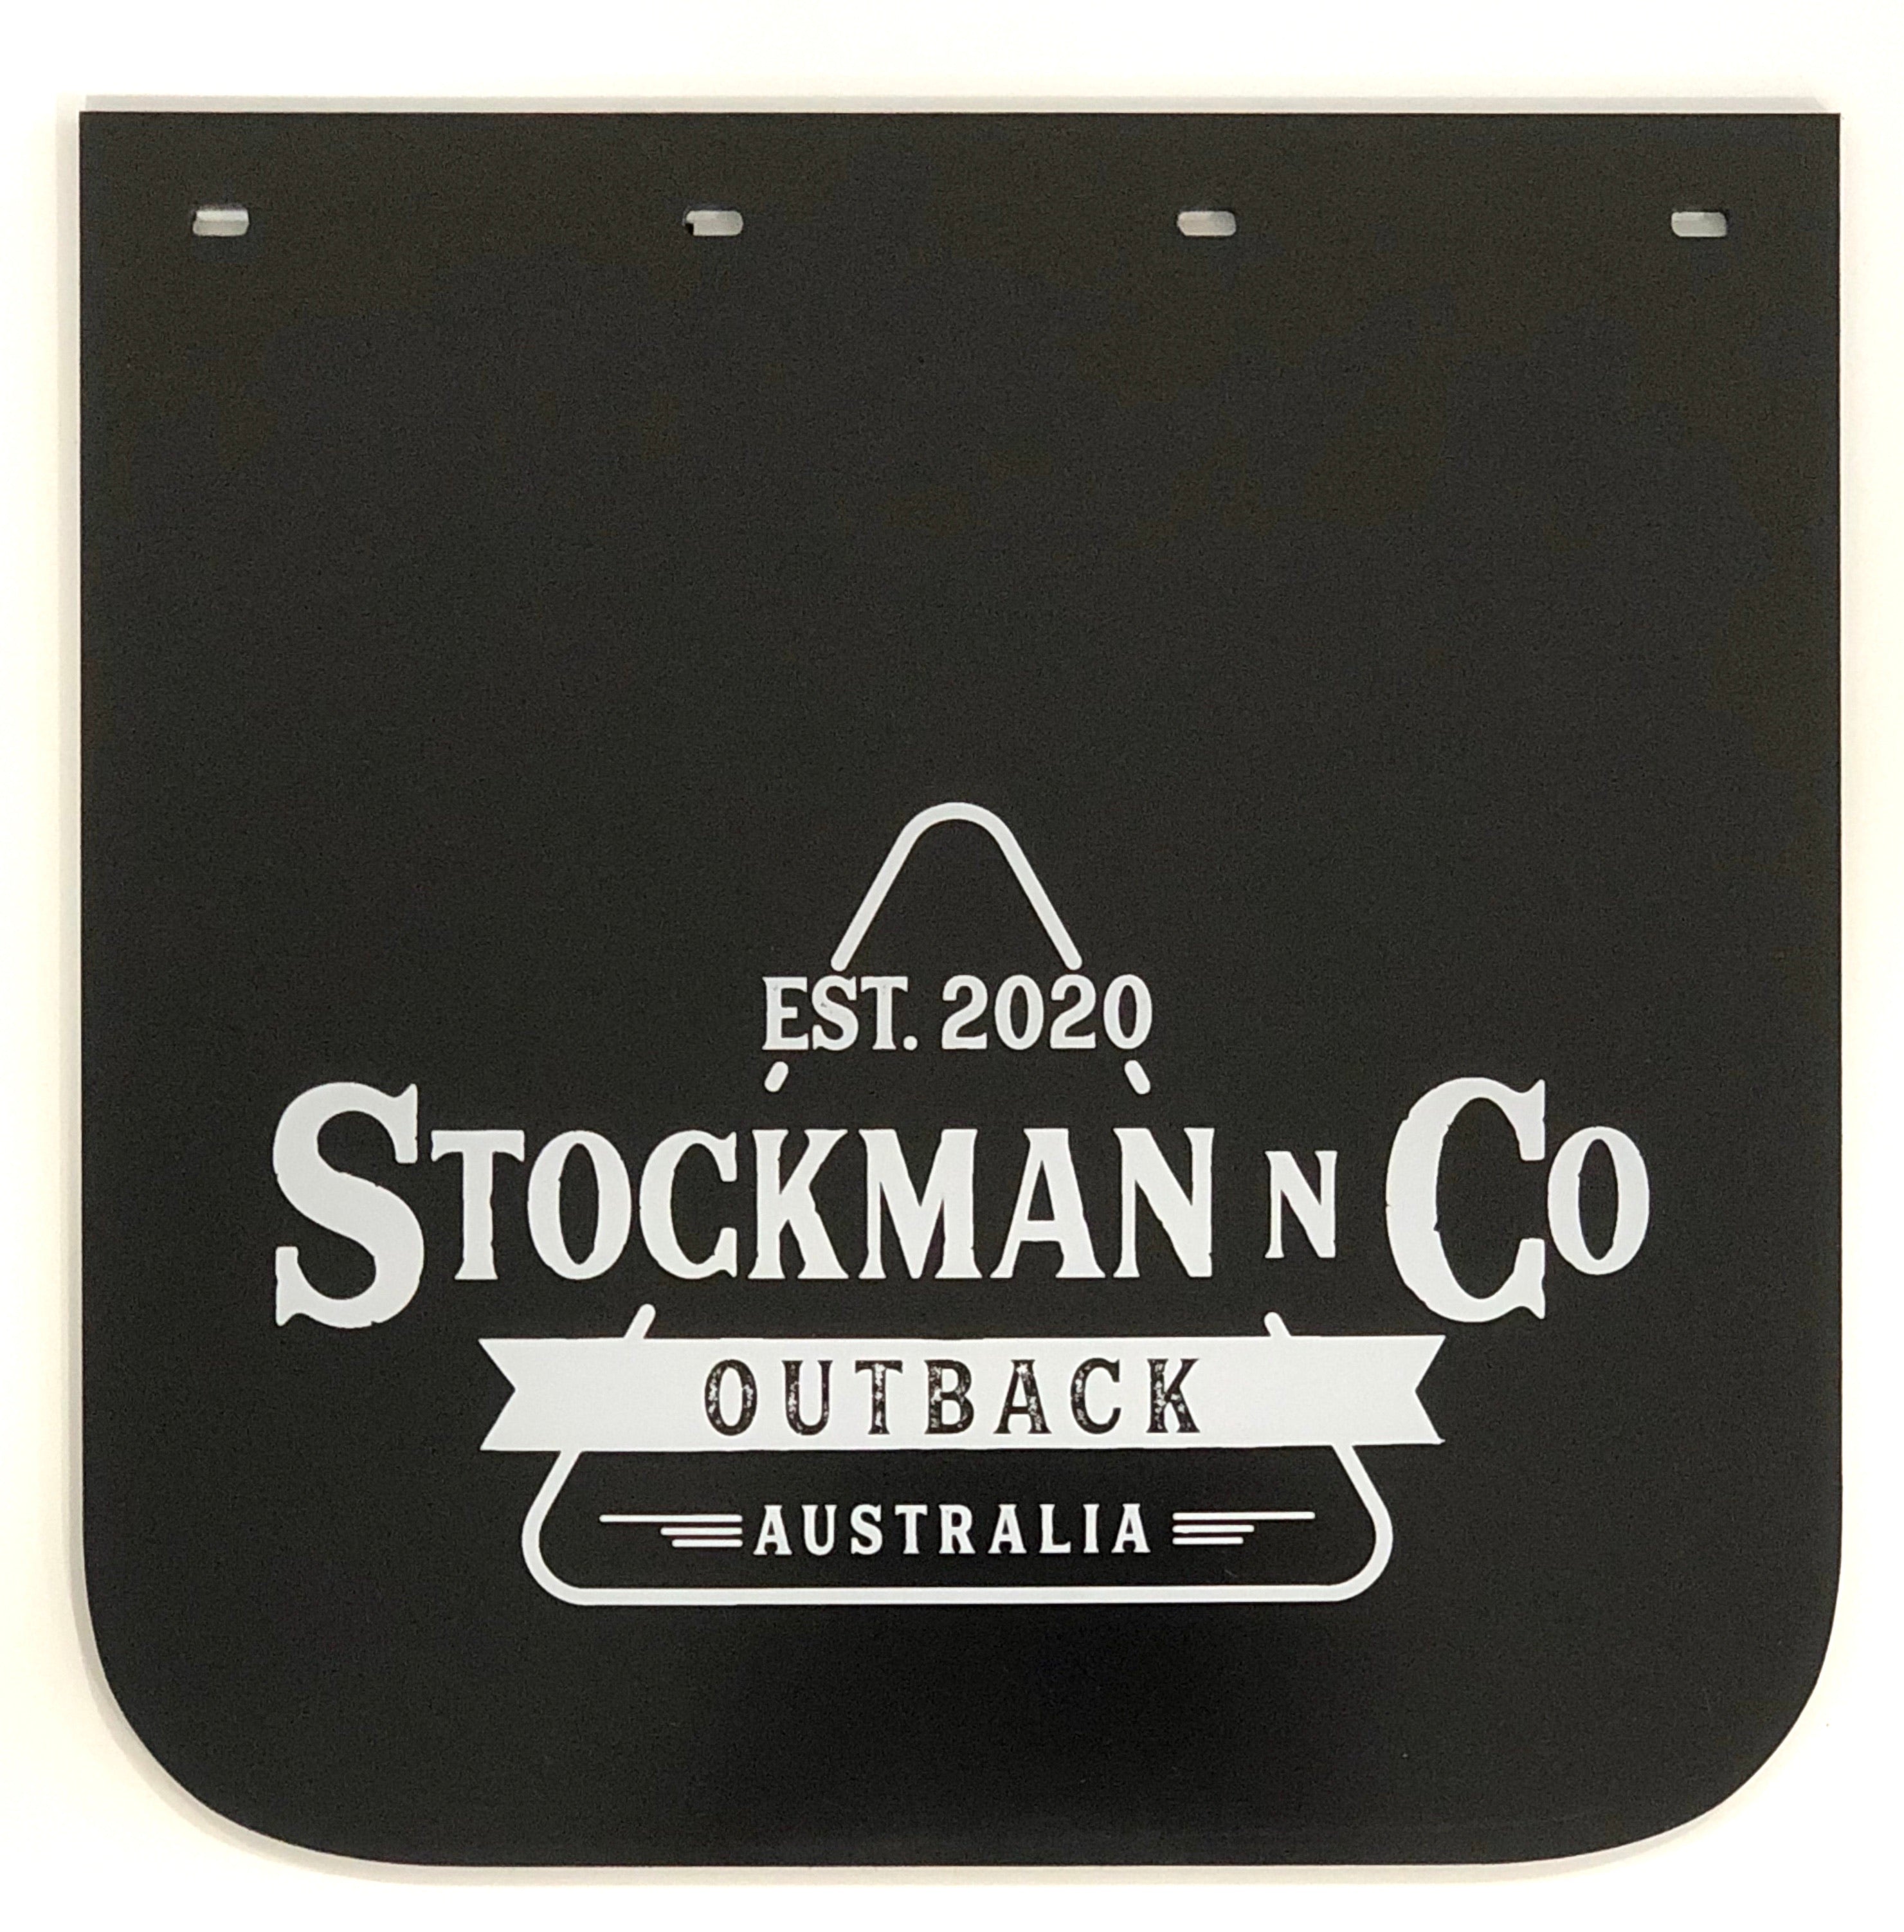 Stockman Outback Mudflaps - STOCKMAN N CO